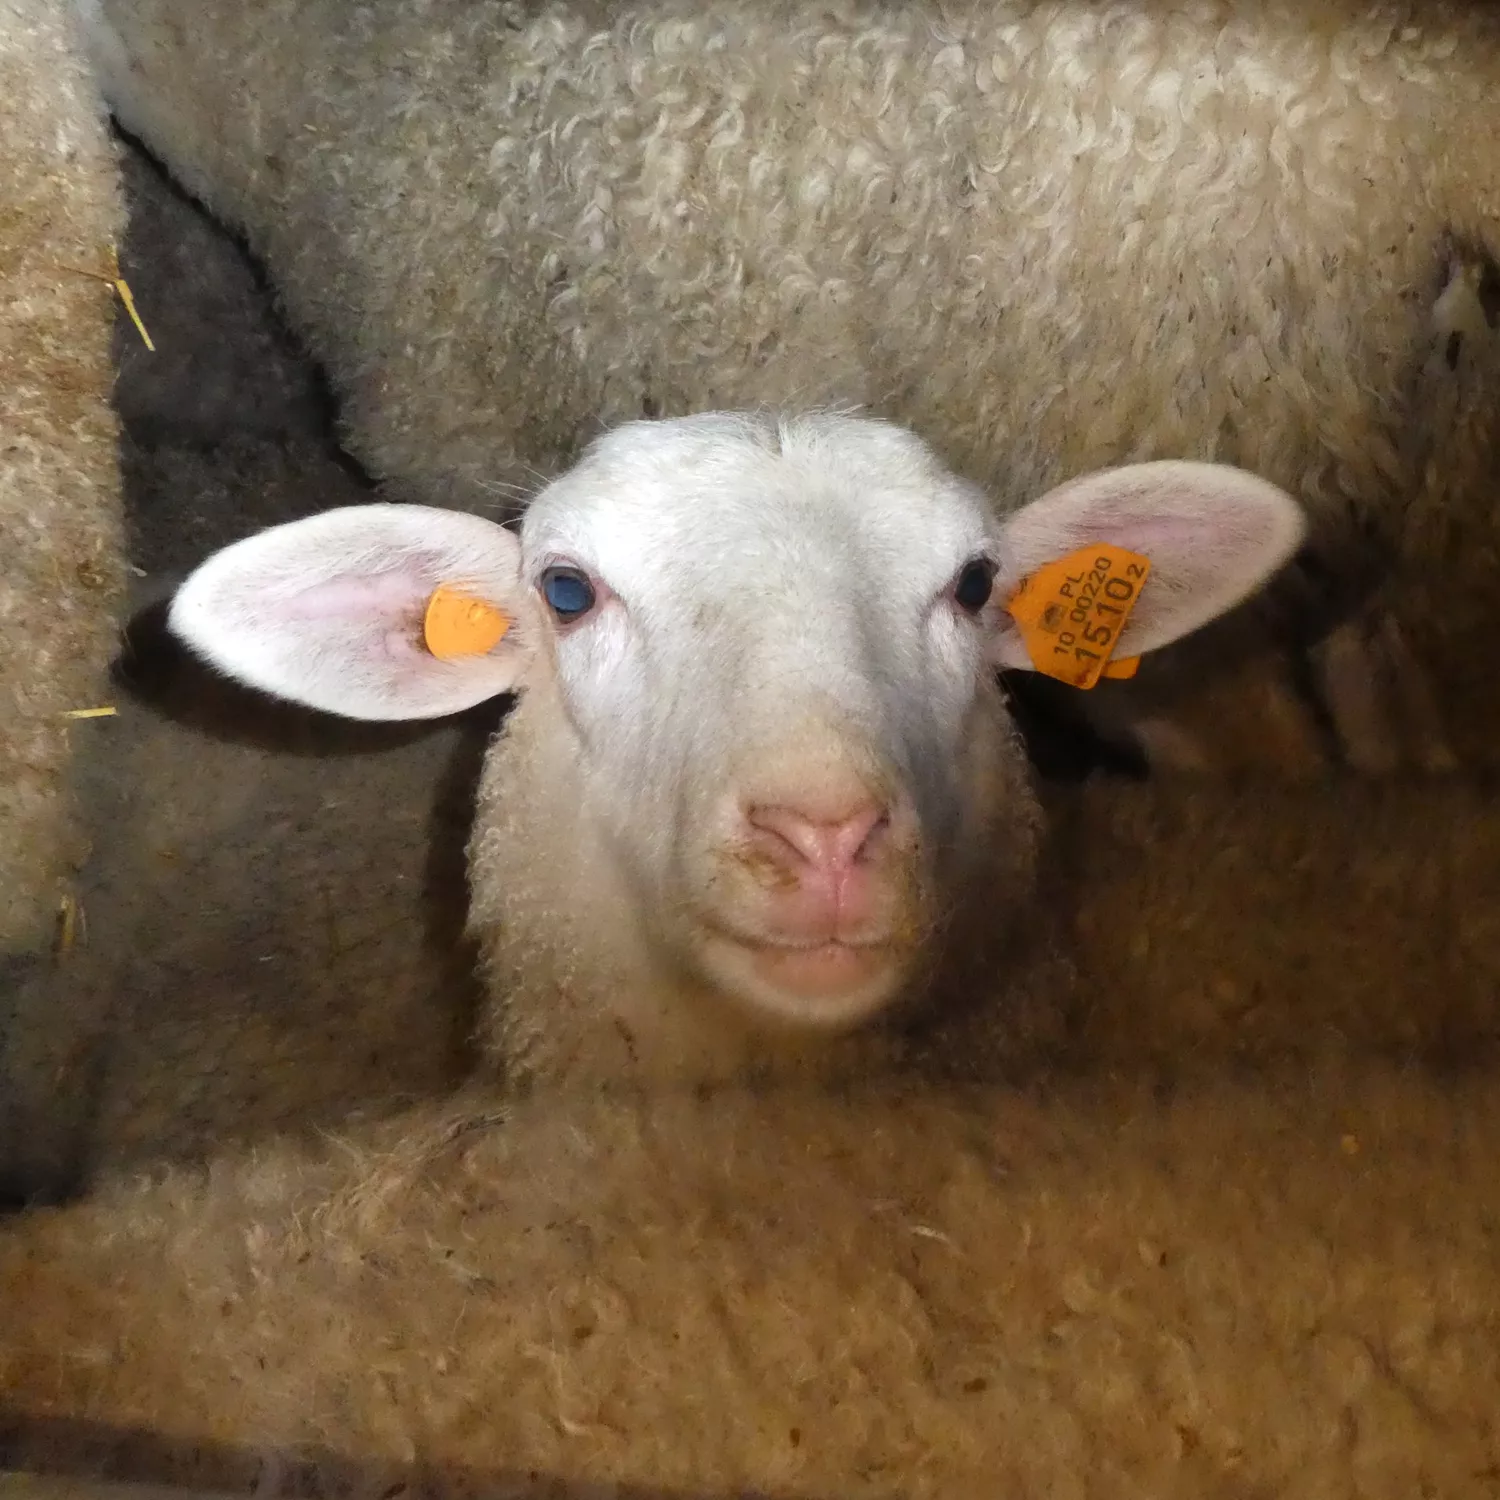 lamb surrounded by other lambs